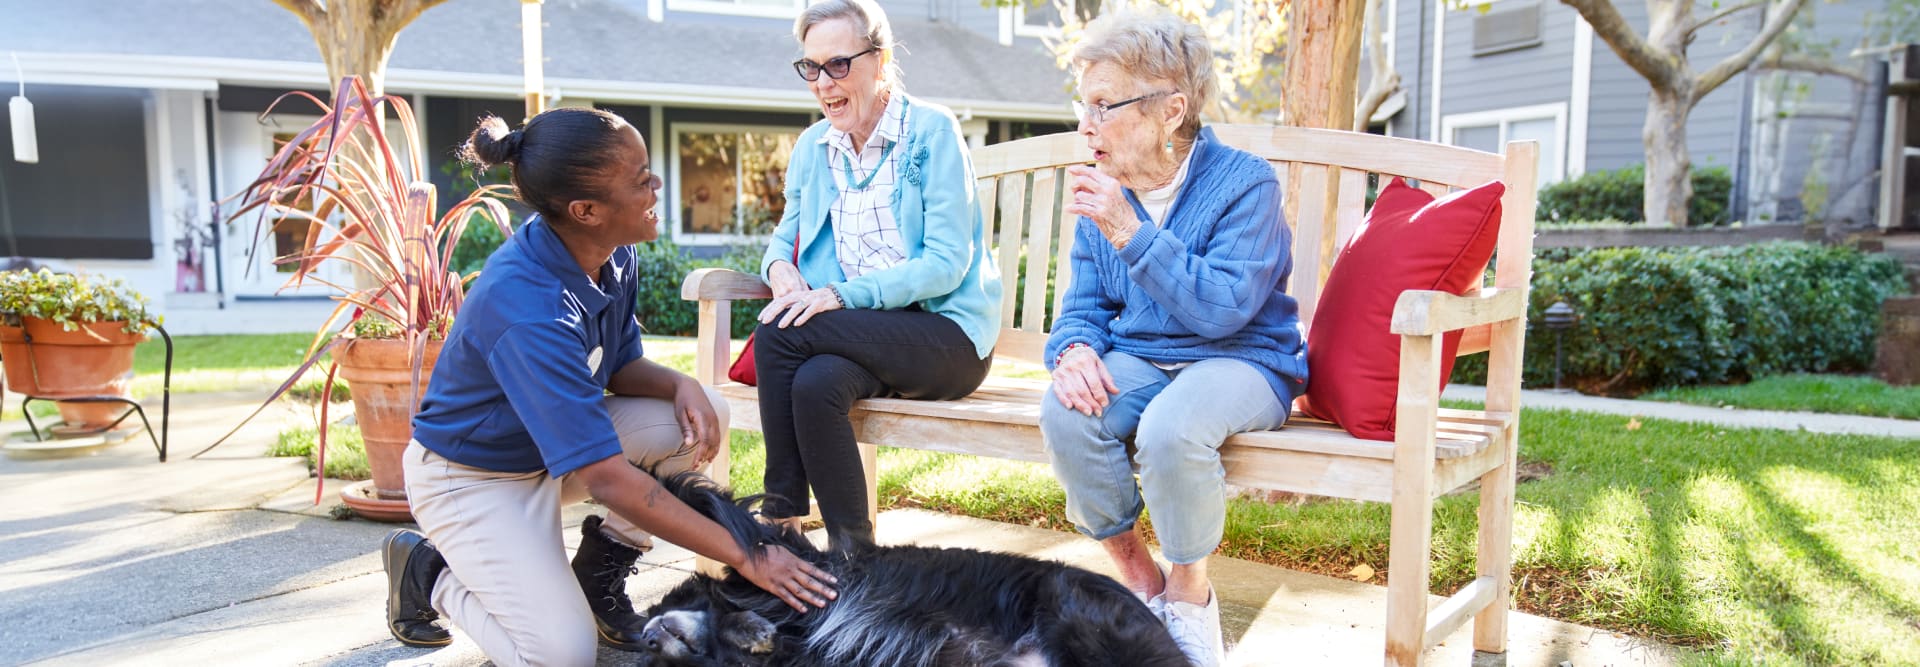 Residents and an employee petting a dog